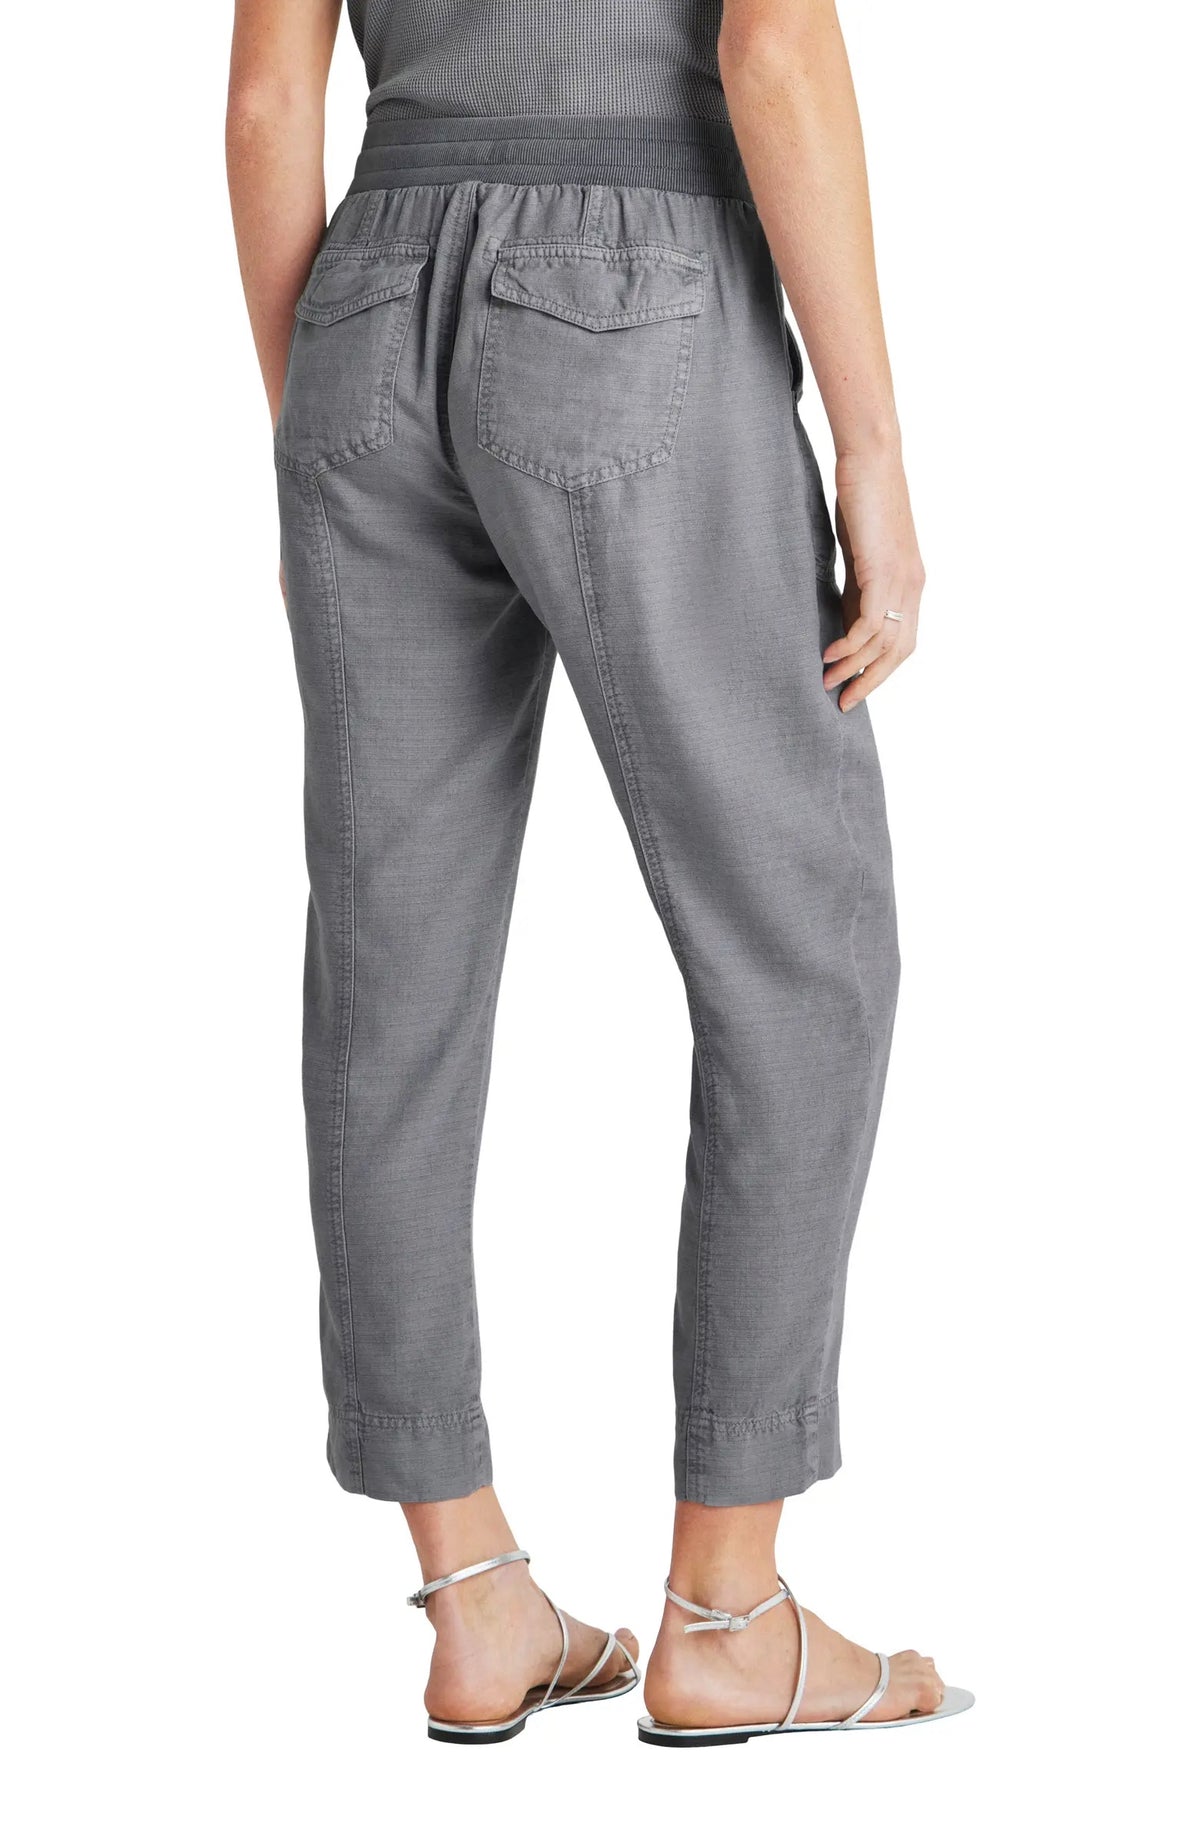 Splendid Collins Pant in Grey Mist - Size S Available